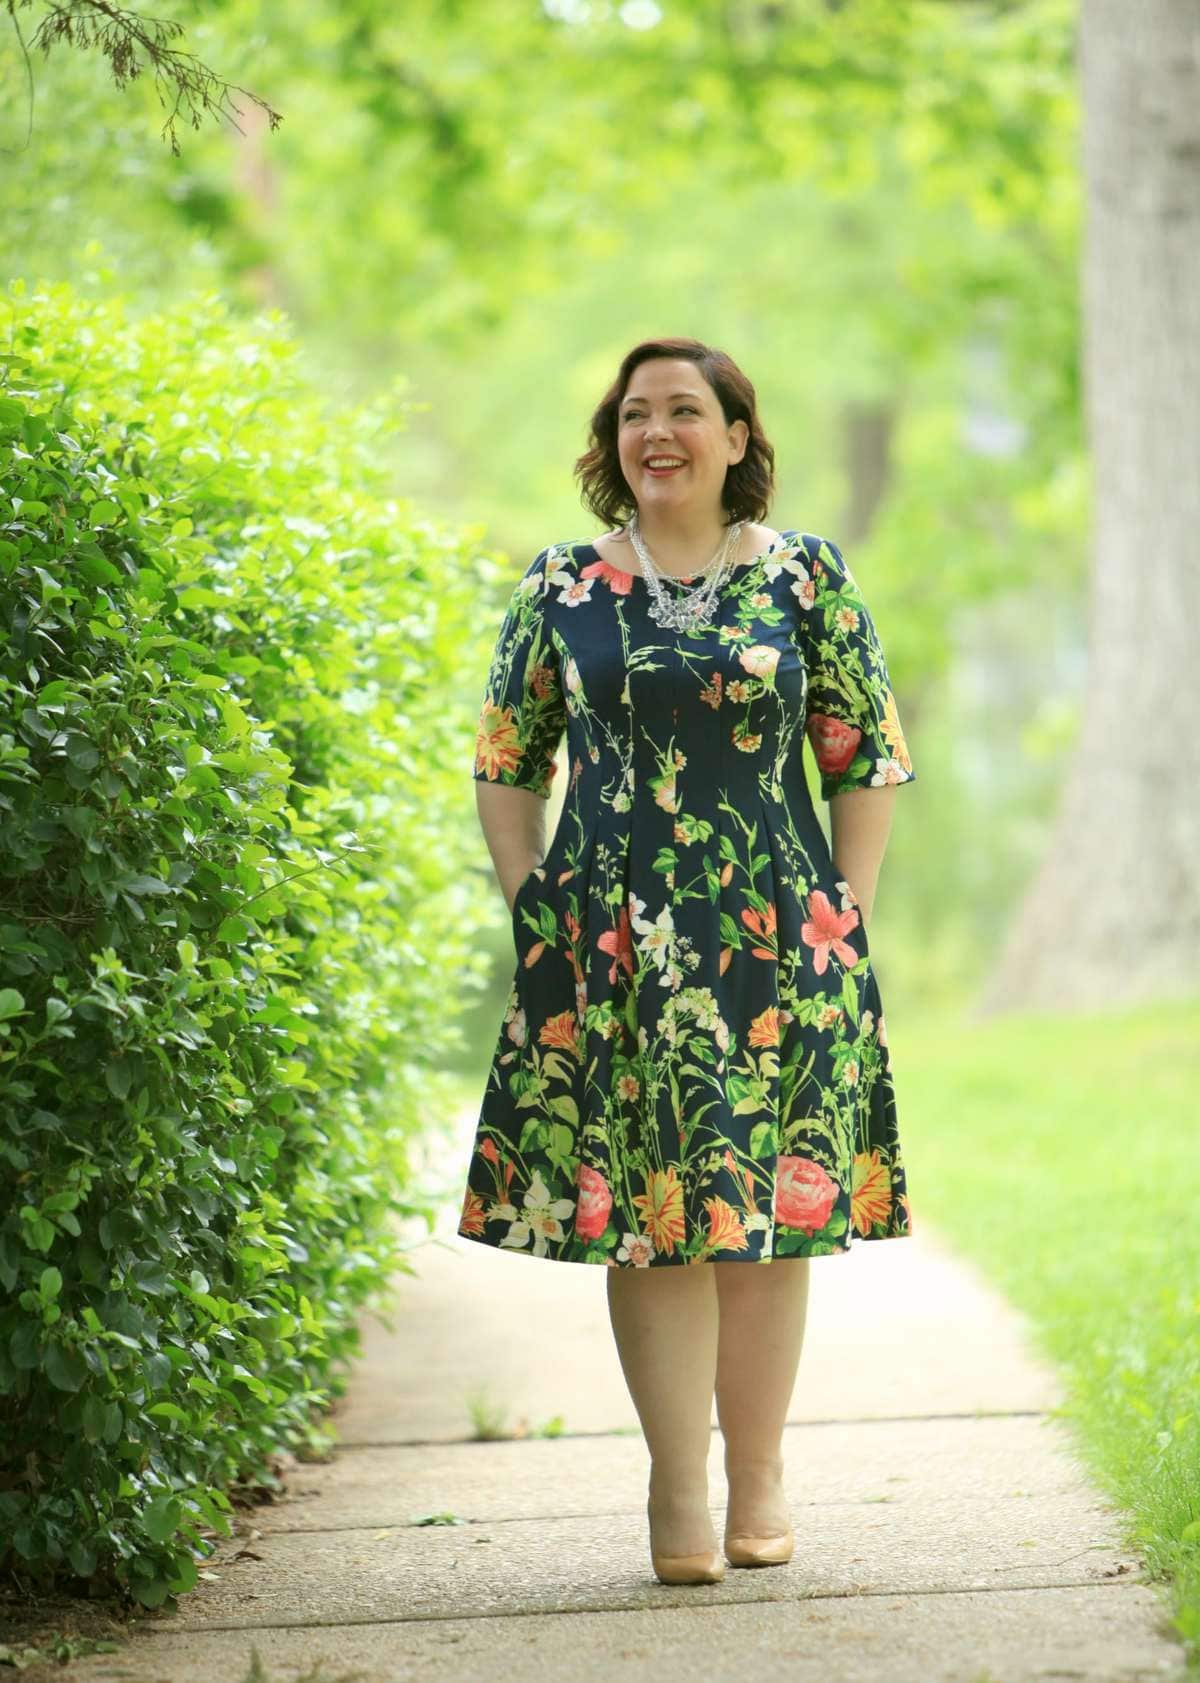 Wardrobe Oxygen in a Gabby Skye floral fit and flare dress via Gwynnie Bee with a Baublebar necklace and Nine West pumps